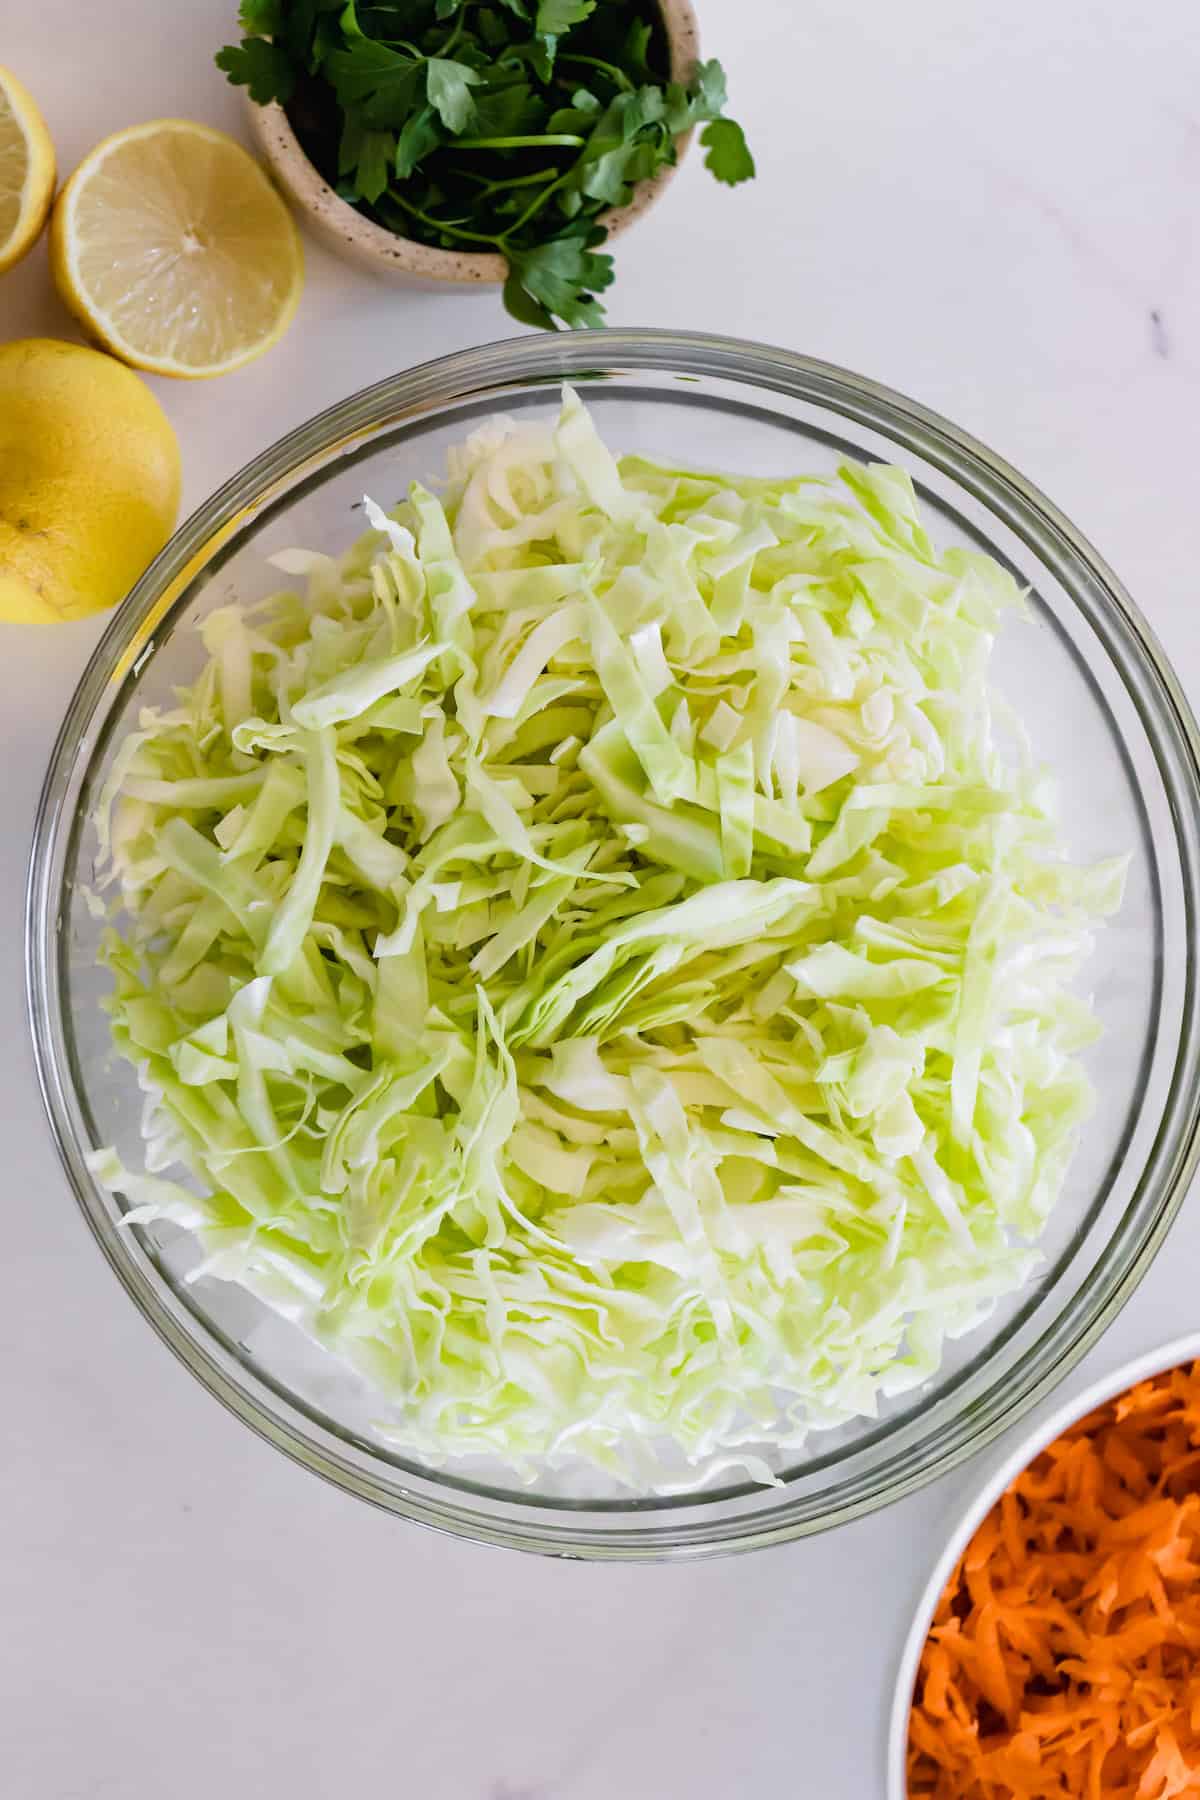 Chopped Cabbage in a Glass Mixing Bowl on a Countertop